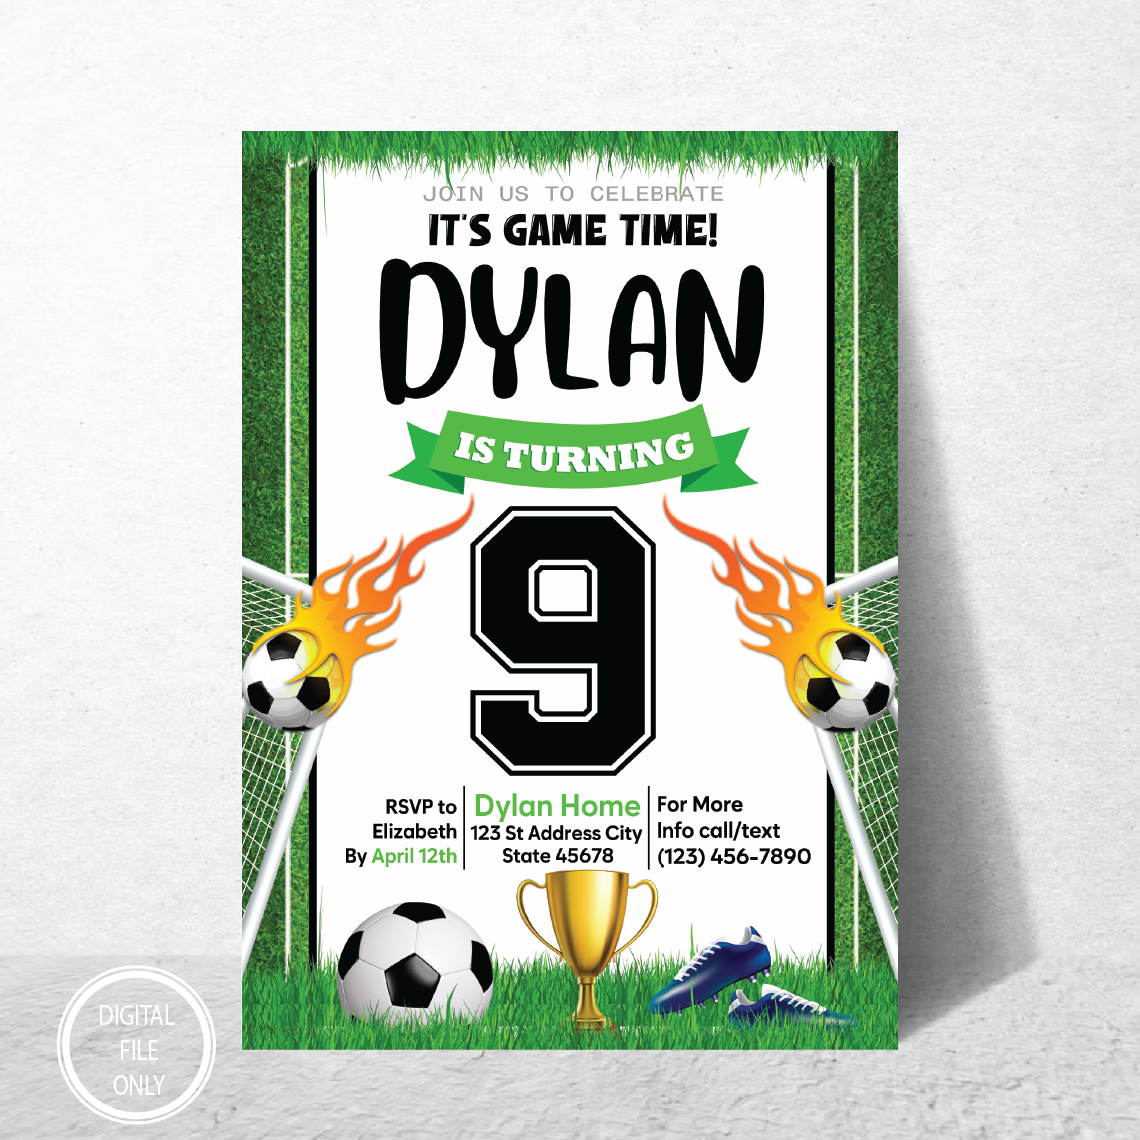 Personalized File Soccer Birthday Invitation, Soccer Party Invite, Invitation, Soccer Party Theme, Football Party, Sports Birthday, PNG File Only